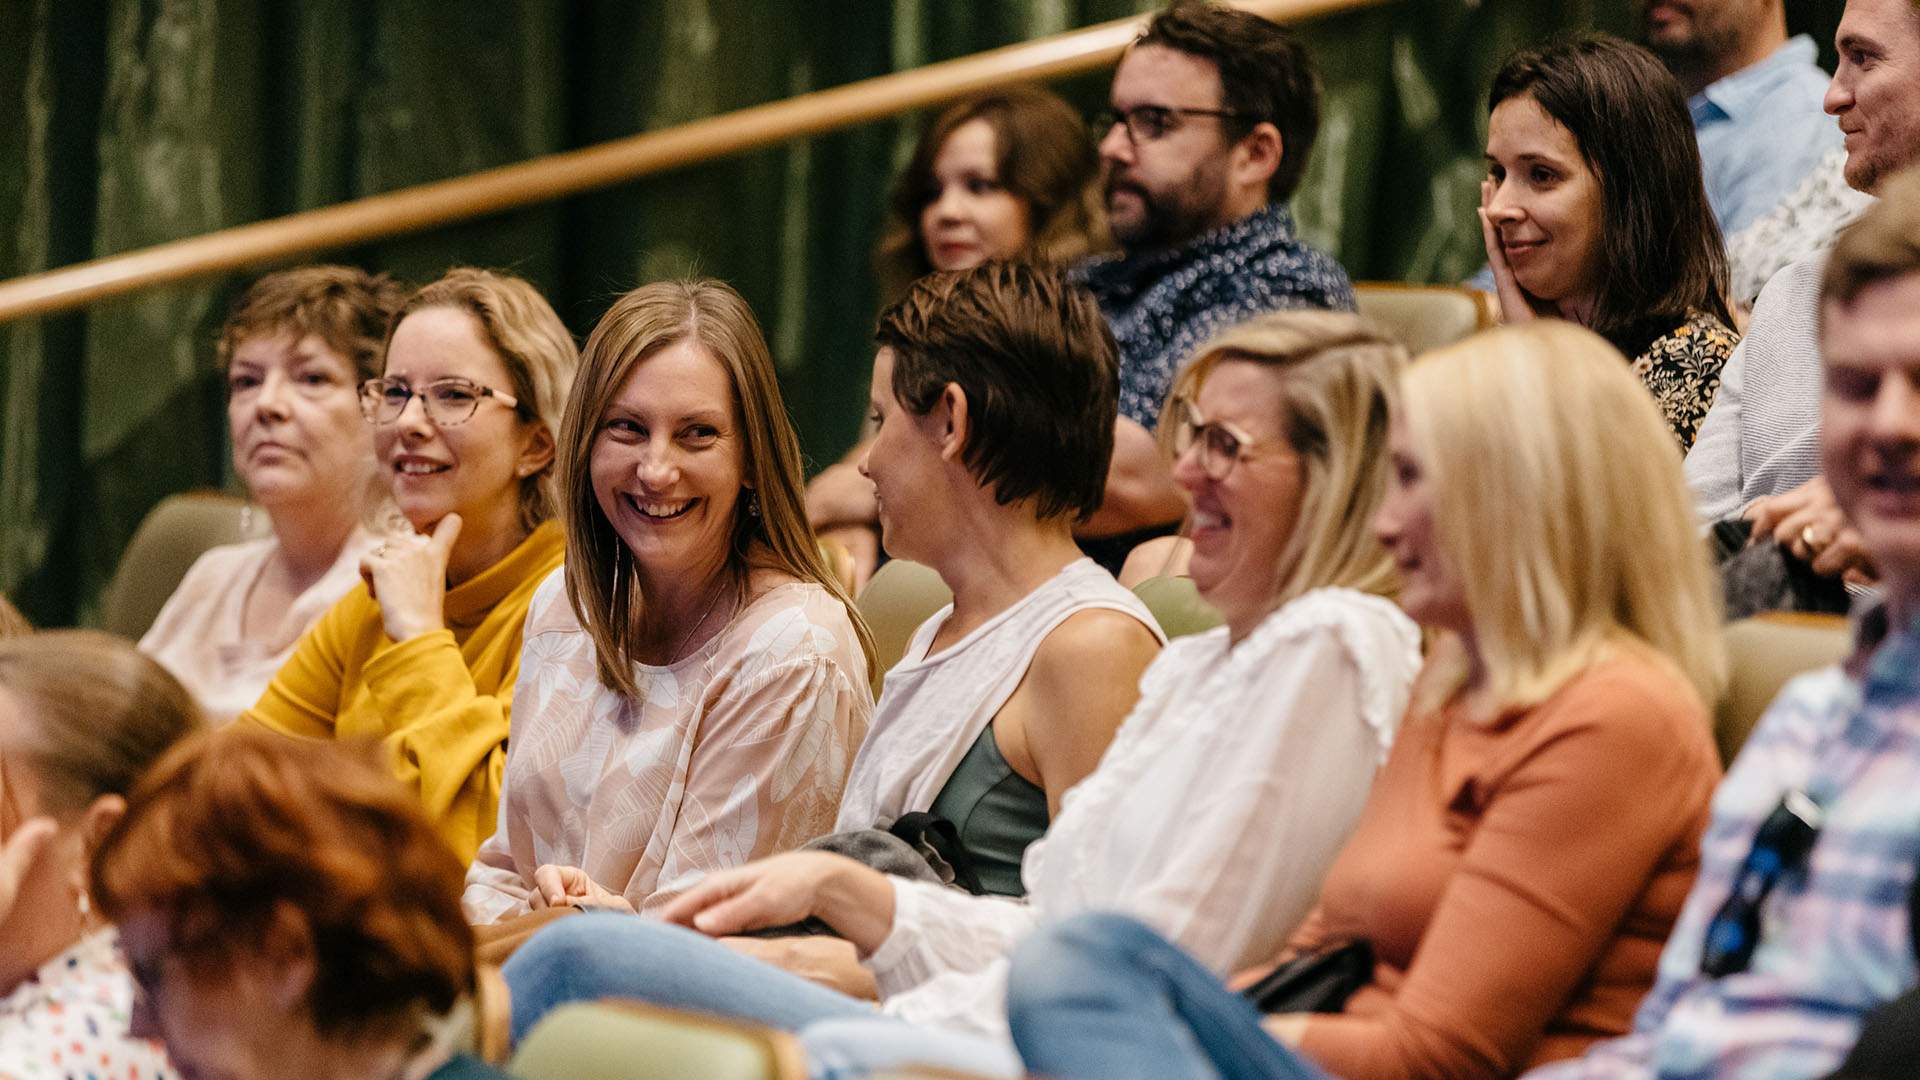 Brisbane Writers Festival's Stacked 2022 Program Features 200-Plus Events Spread Across the City